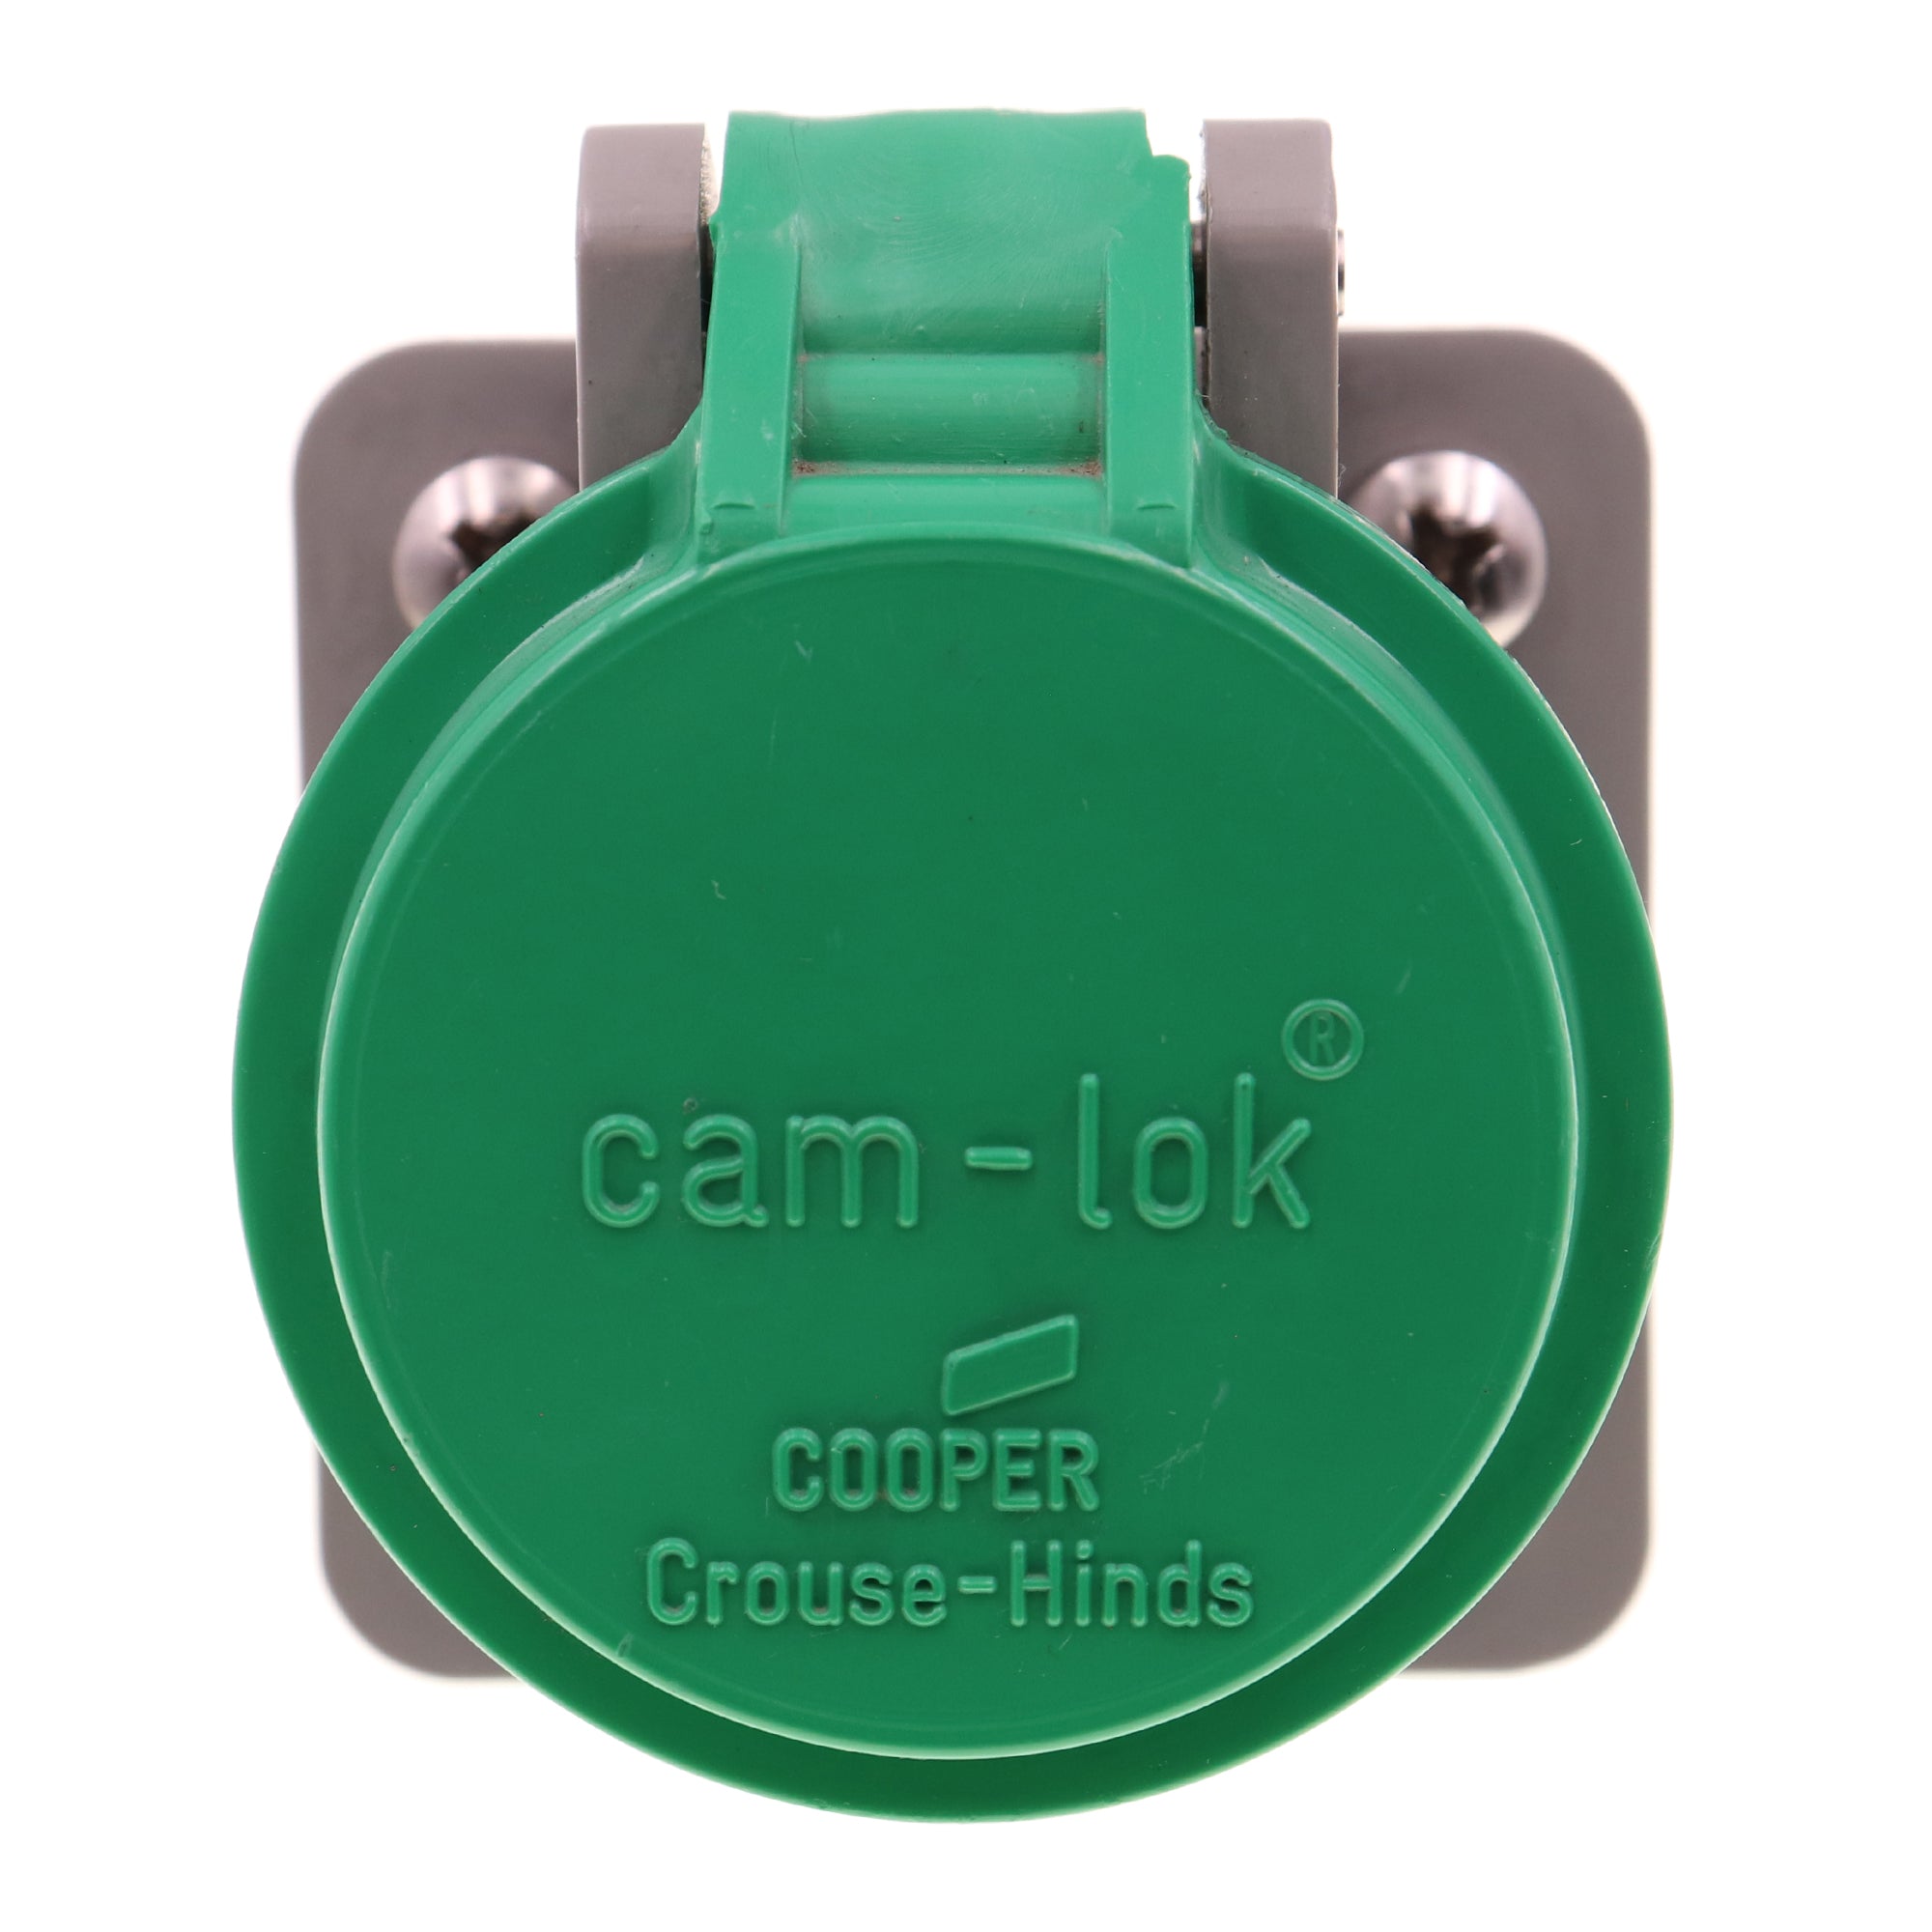 Crouse Hinds, CROUSE-HINDS E1016-1635 + E1016SC-35 J TYPE CAMLOCK FEMALE RECEPTACLE 400A GREEN